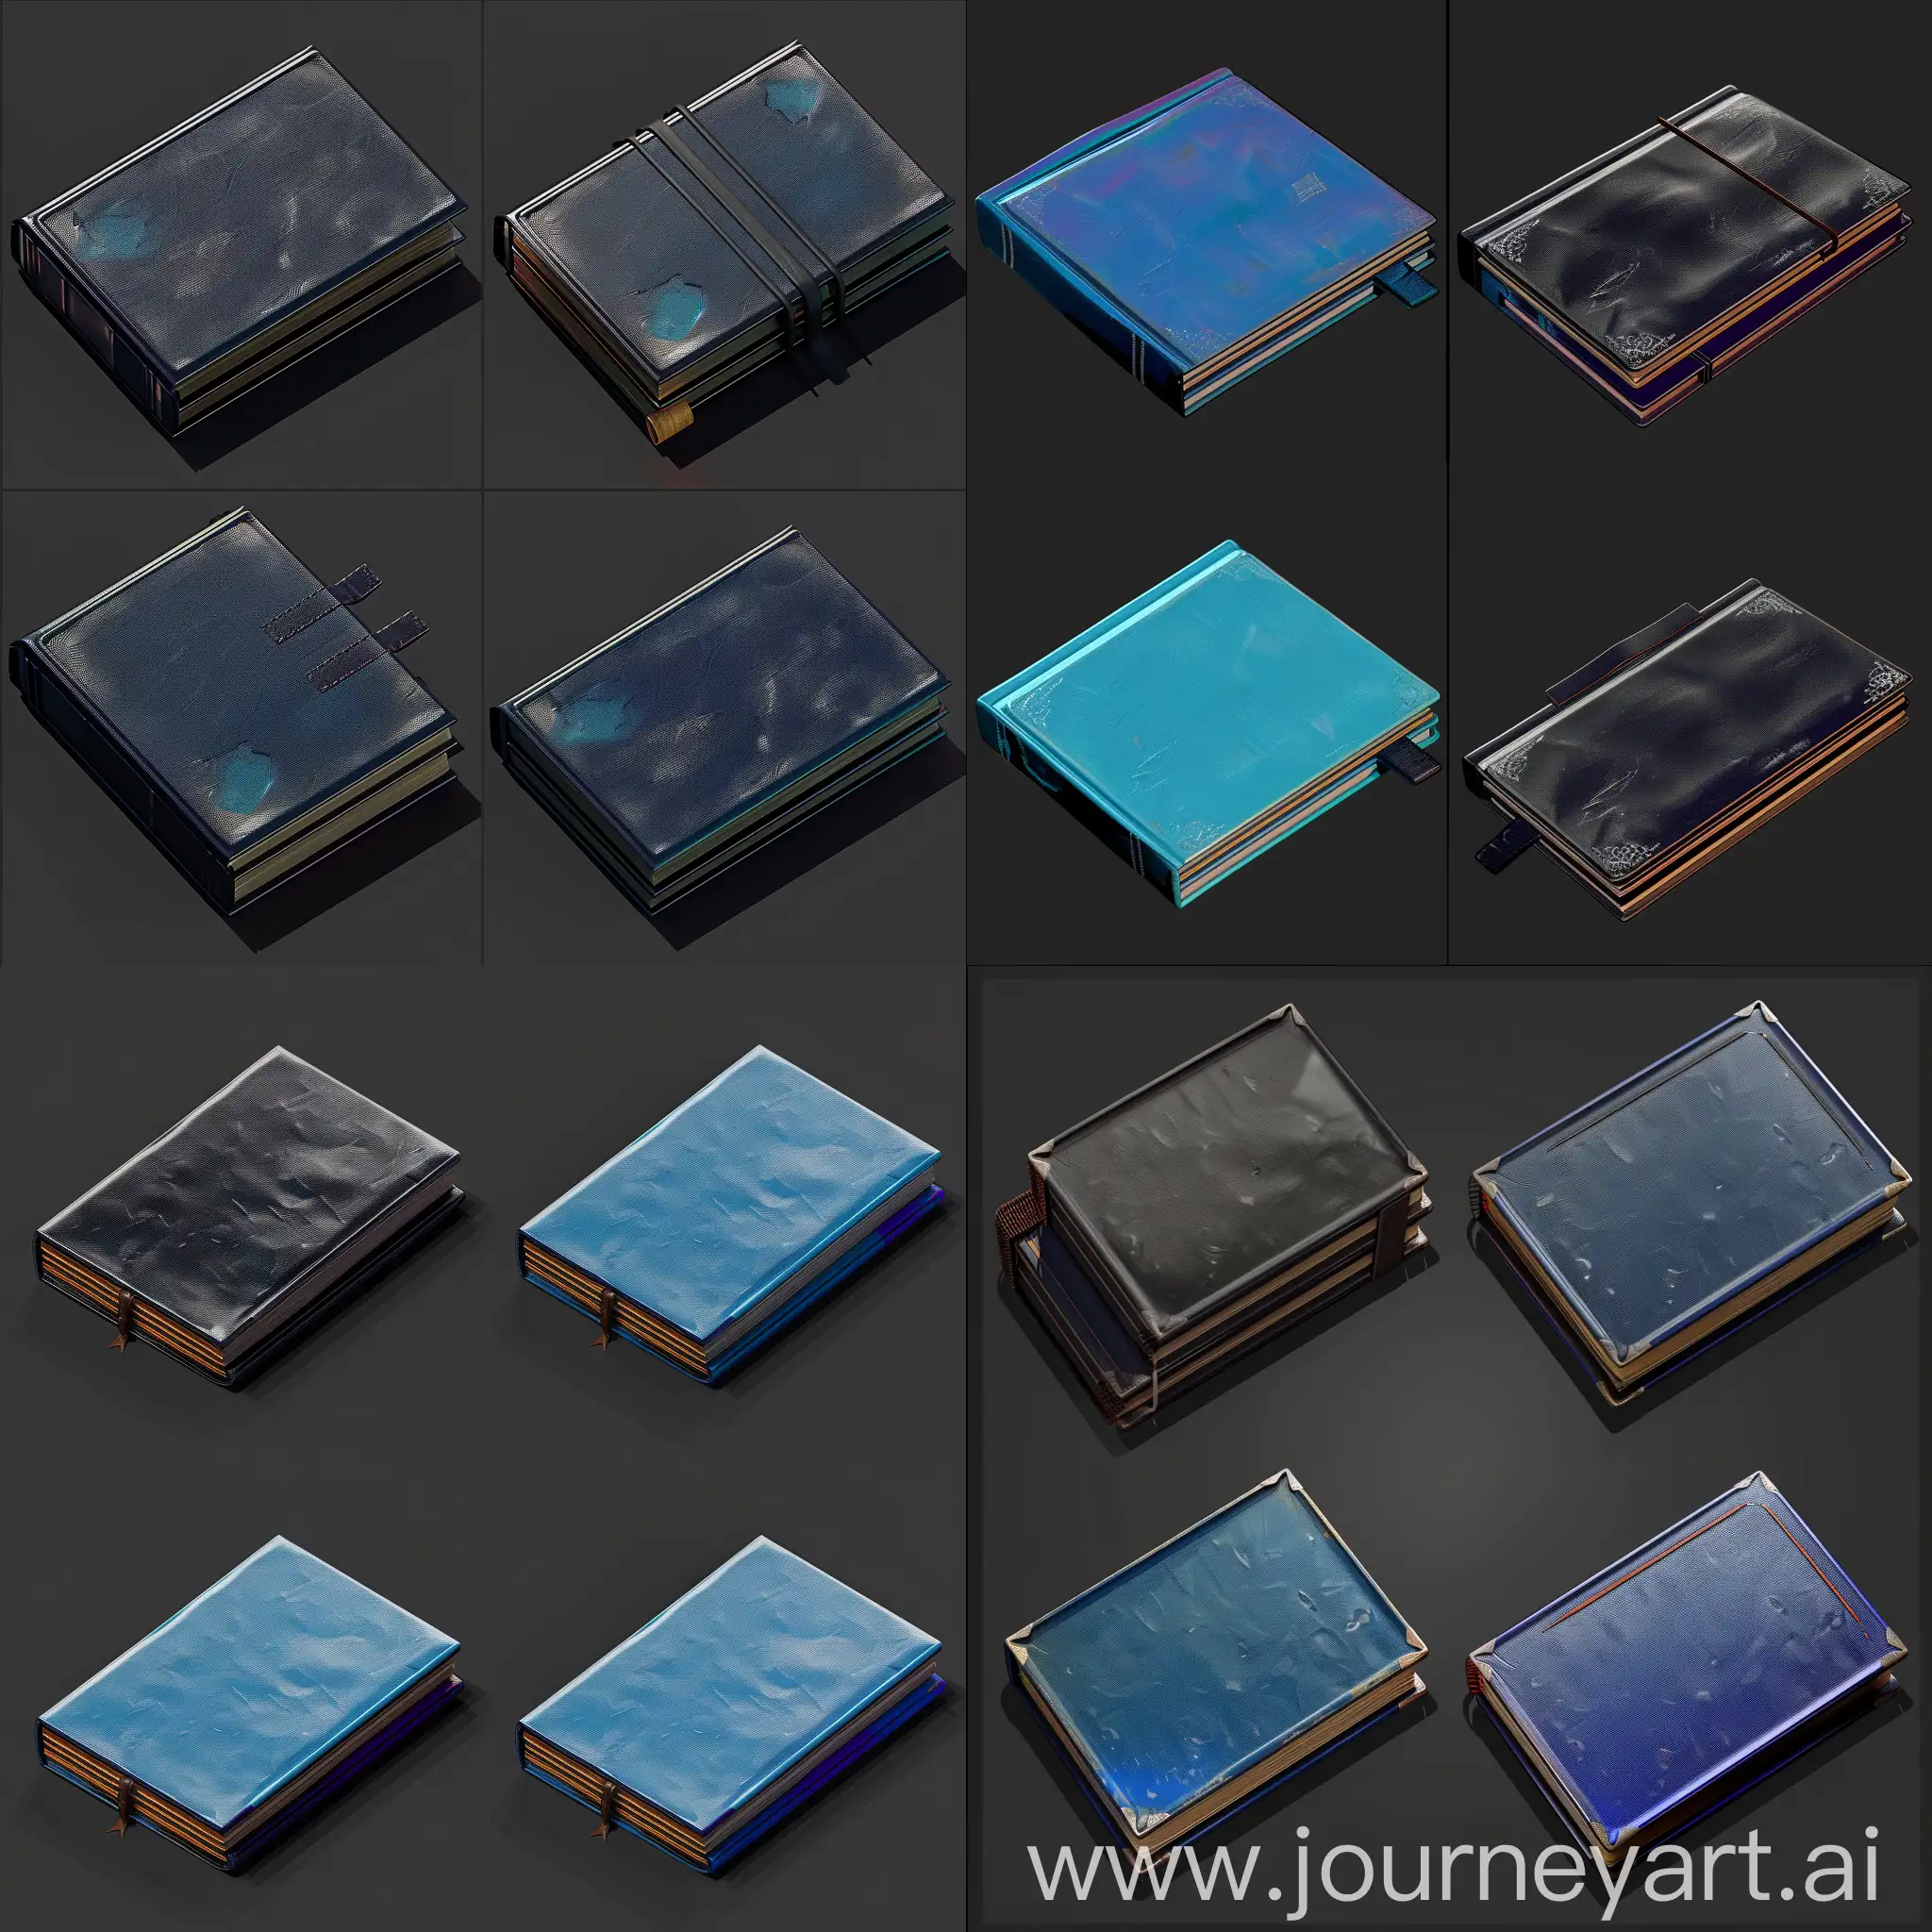 https://i.imgur.com/yfwPSIw.png https://i.imgur.com/Q8xDucH.png realistic photo of isometric set, very thin smooth blue textbooks on black background, style of unreal engine 3d render, ultrarealistic style, shiny, leather cover, isometric set, spritesheet --style raw --stylize 50  --iw 1.5 --chaos 10